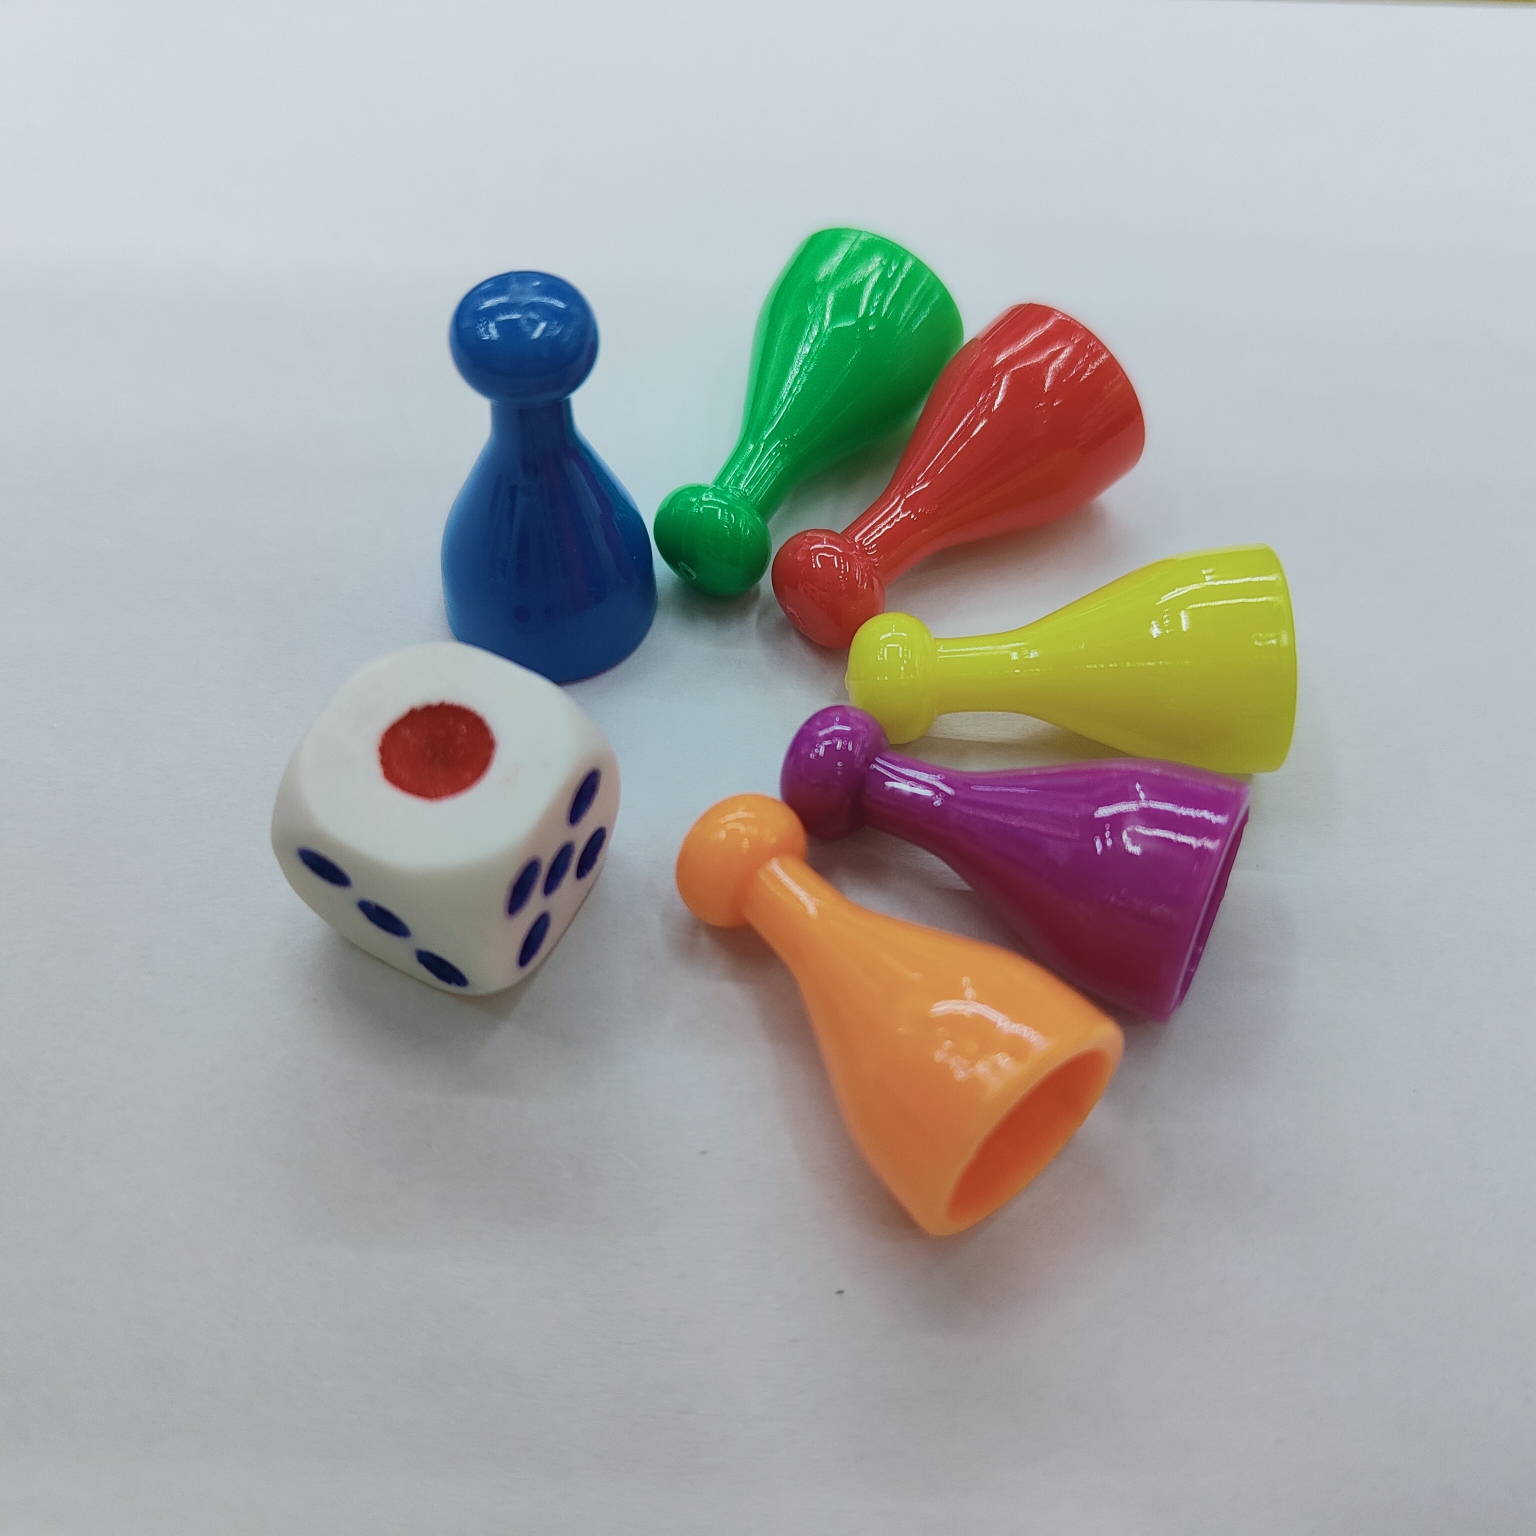 【Yiwu Haonan Sports】 Dice Plastic Chess Game Chess pieces transparent pawn horn pieces